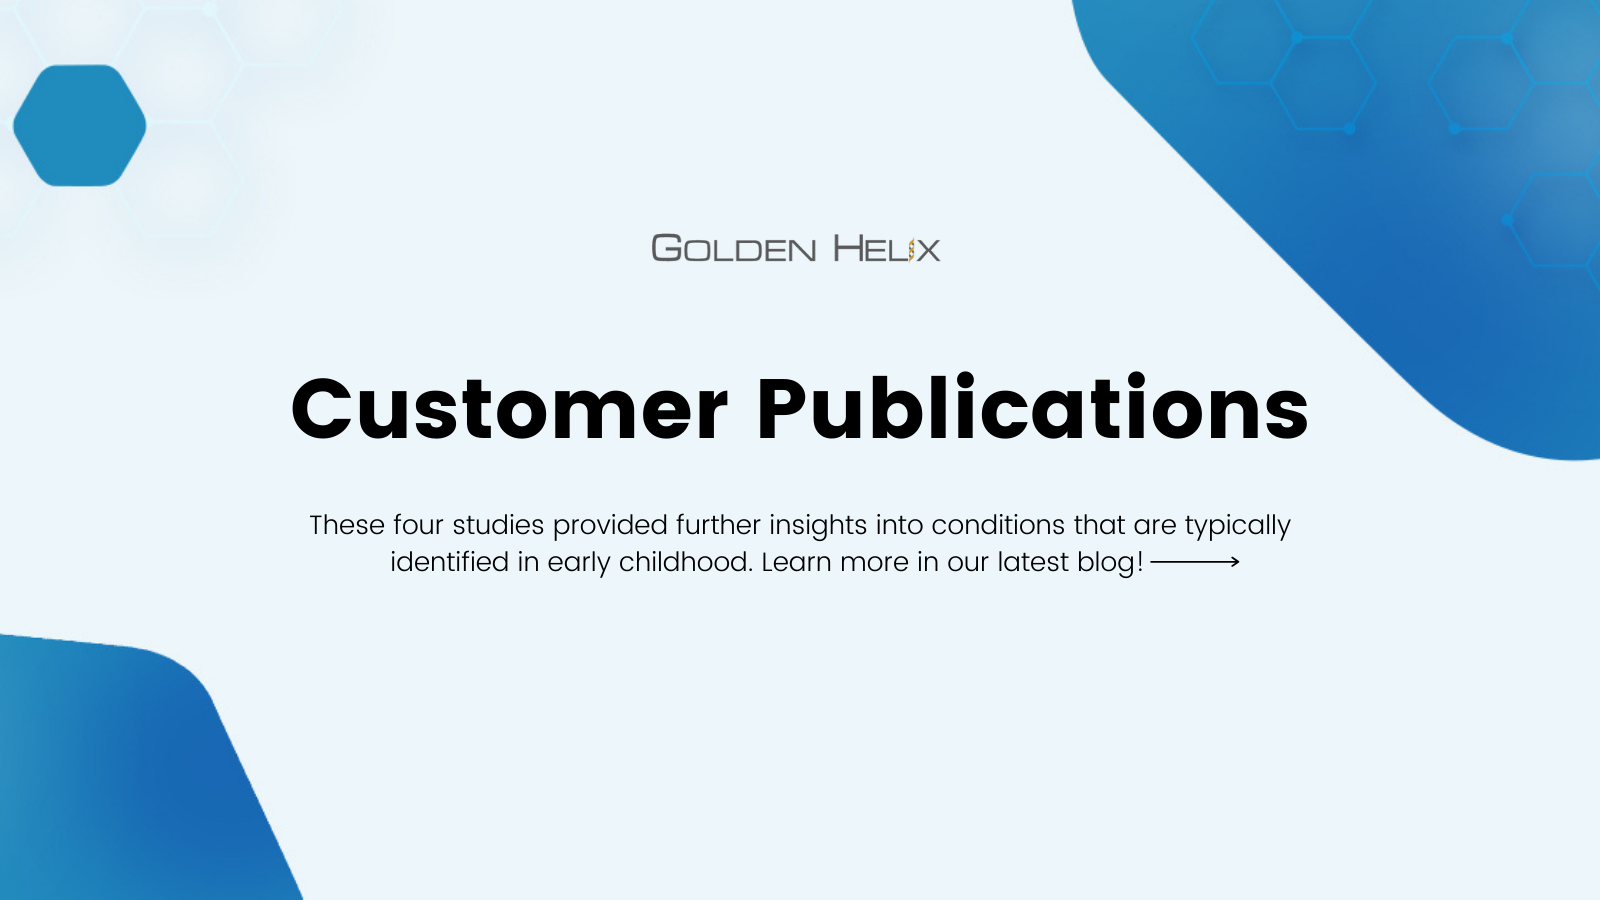 Customer Publications in July 2021